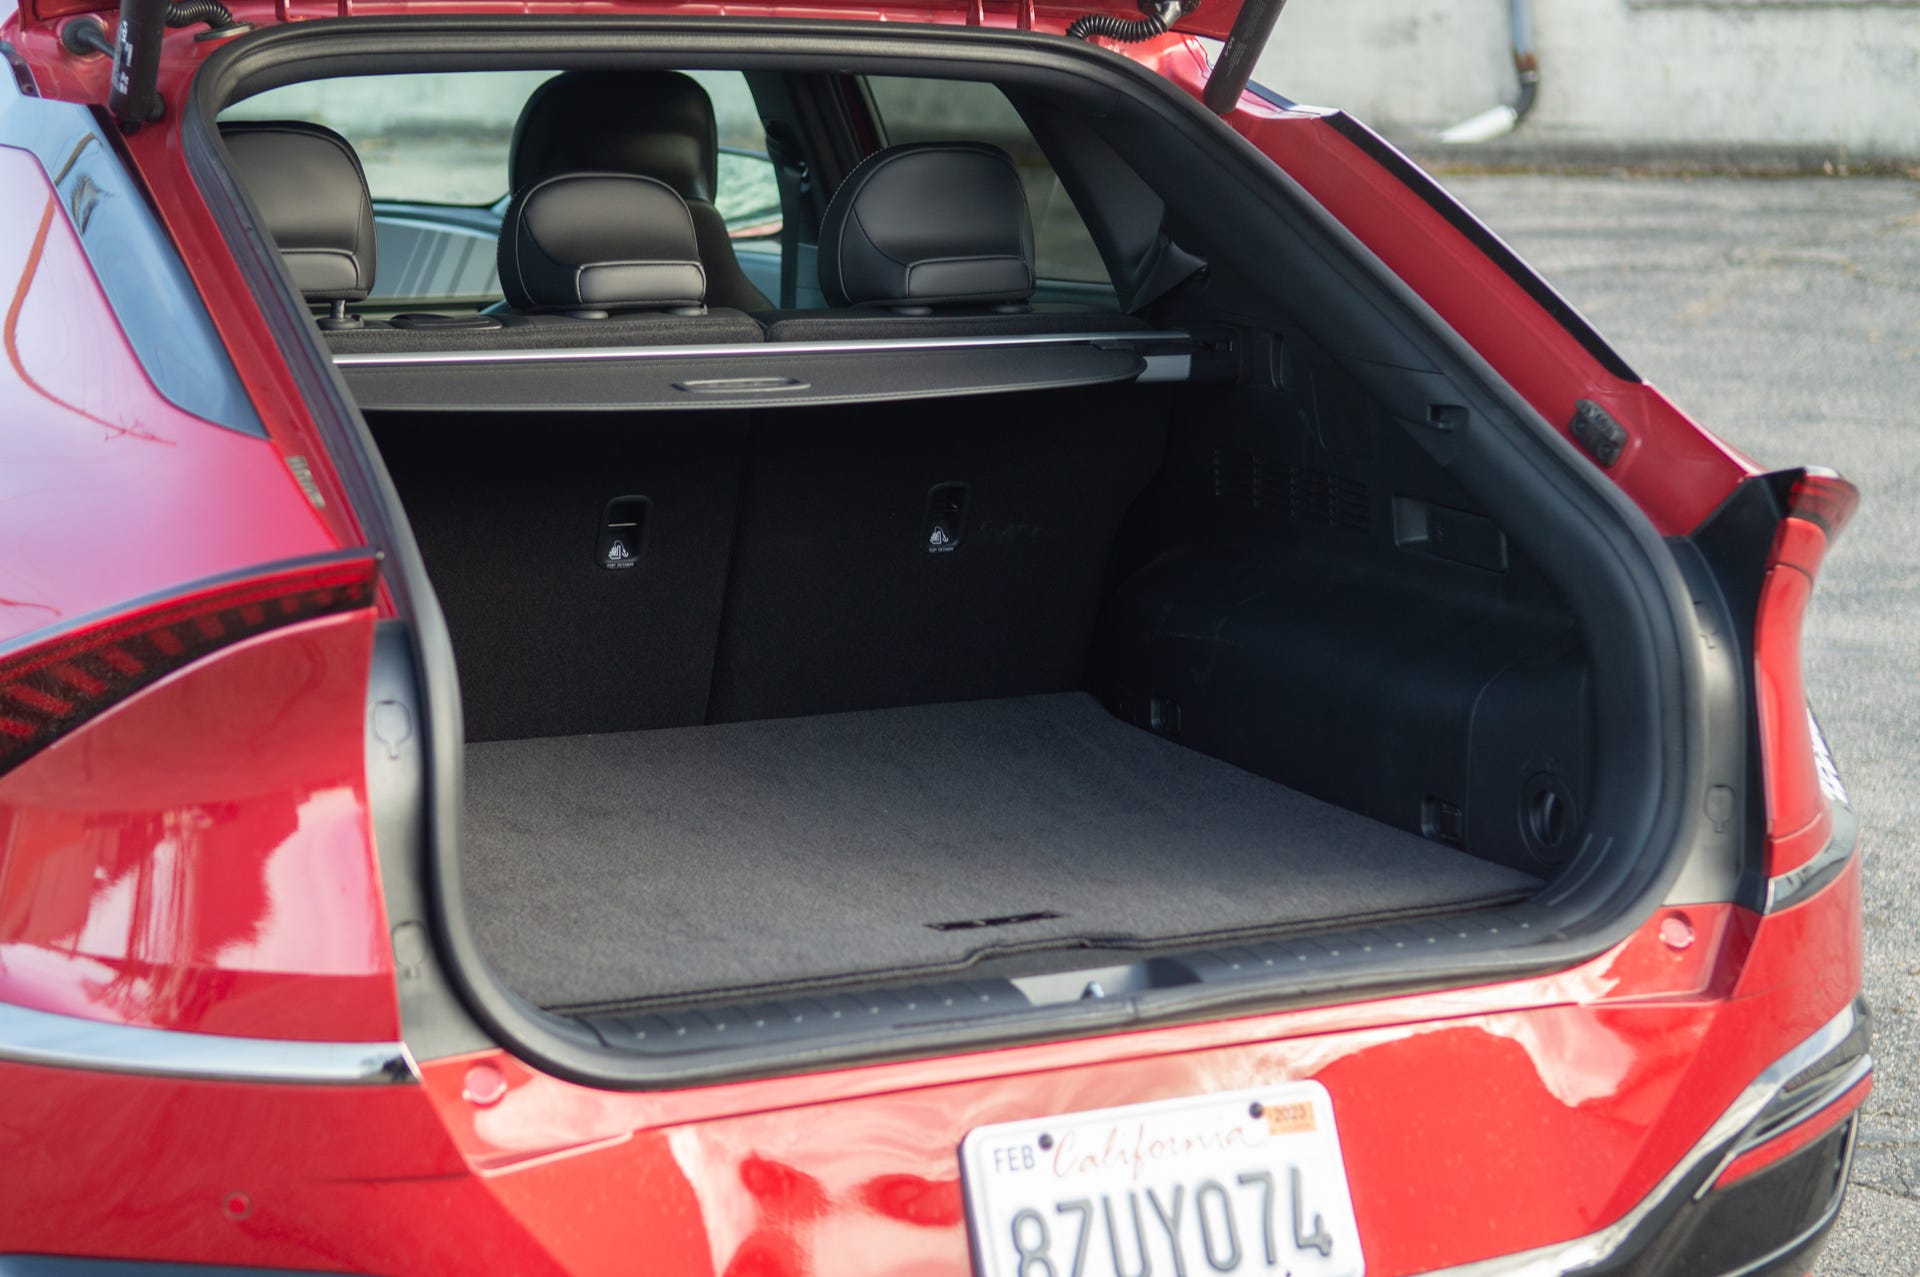 2022 Kia EV6 in red, showing off the trunk capacity